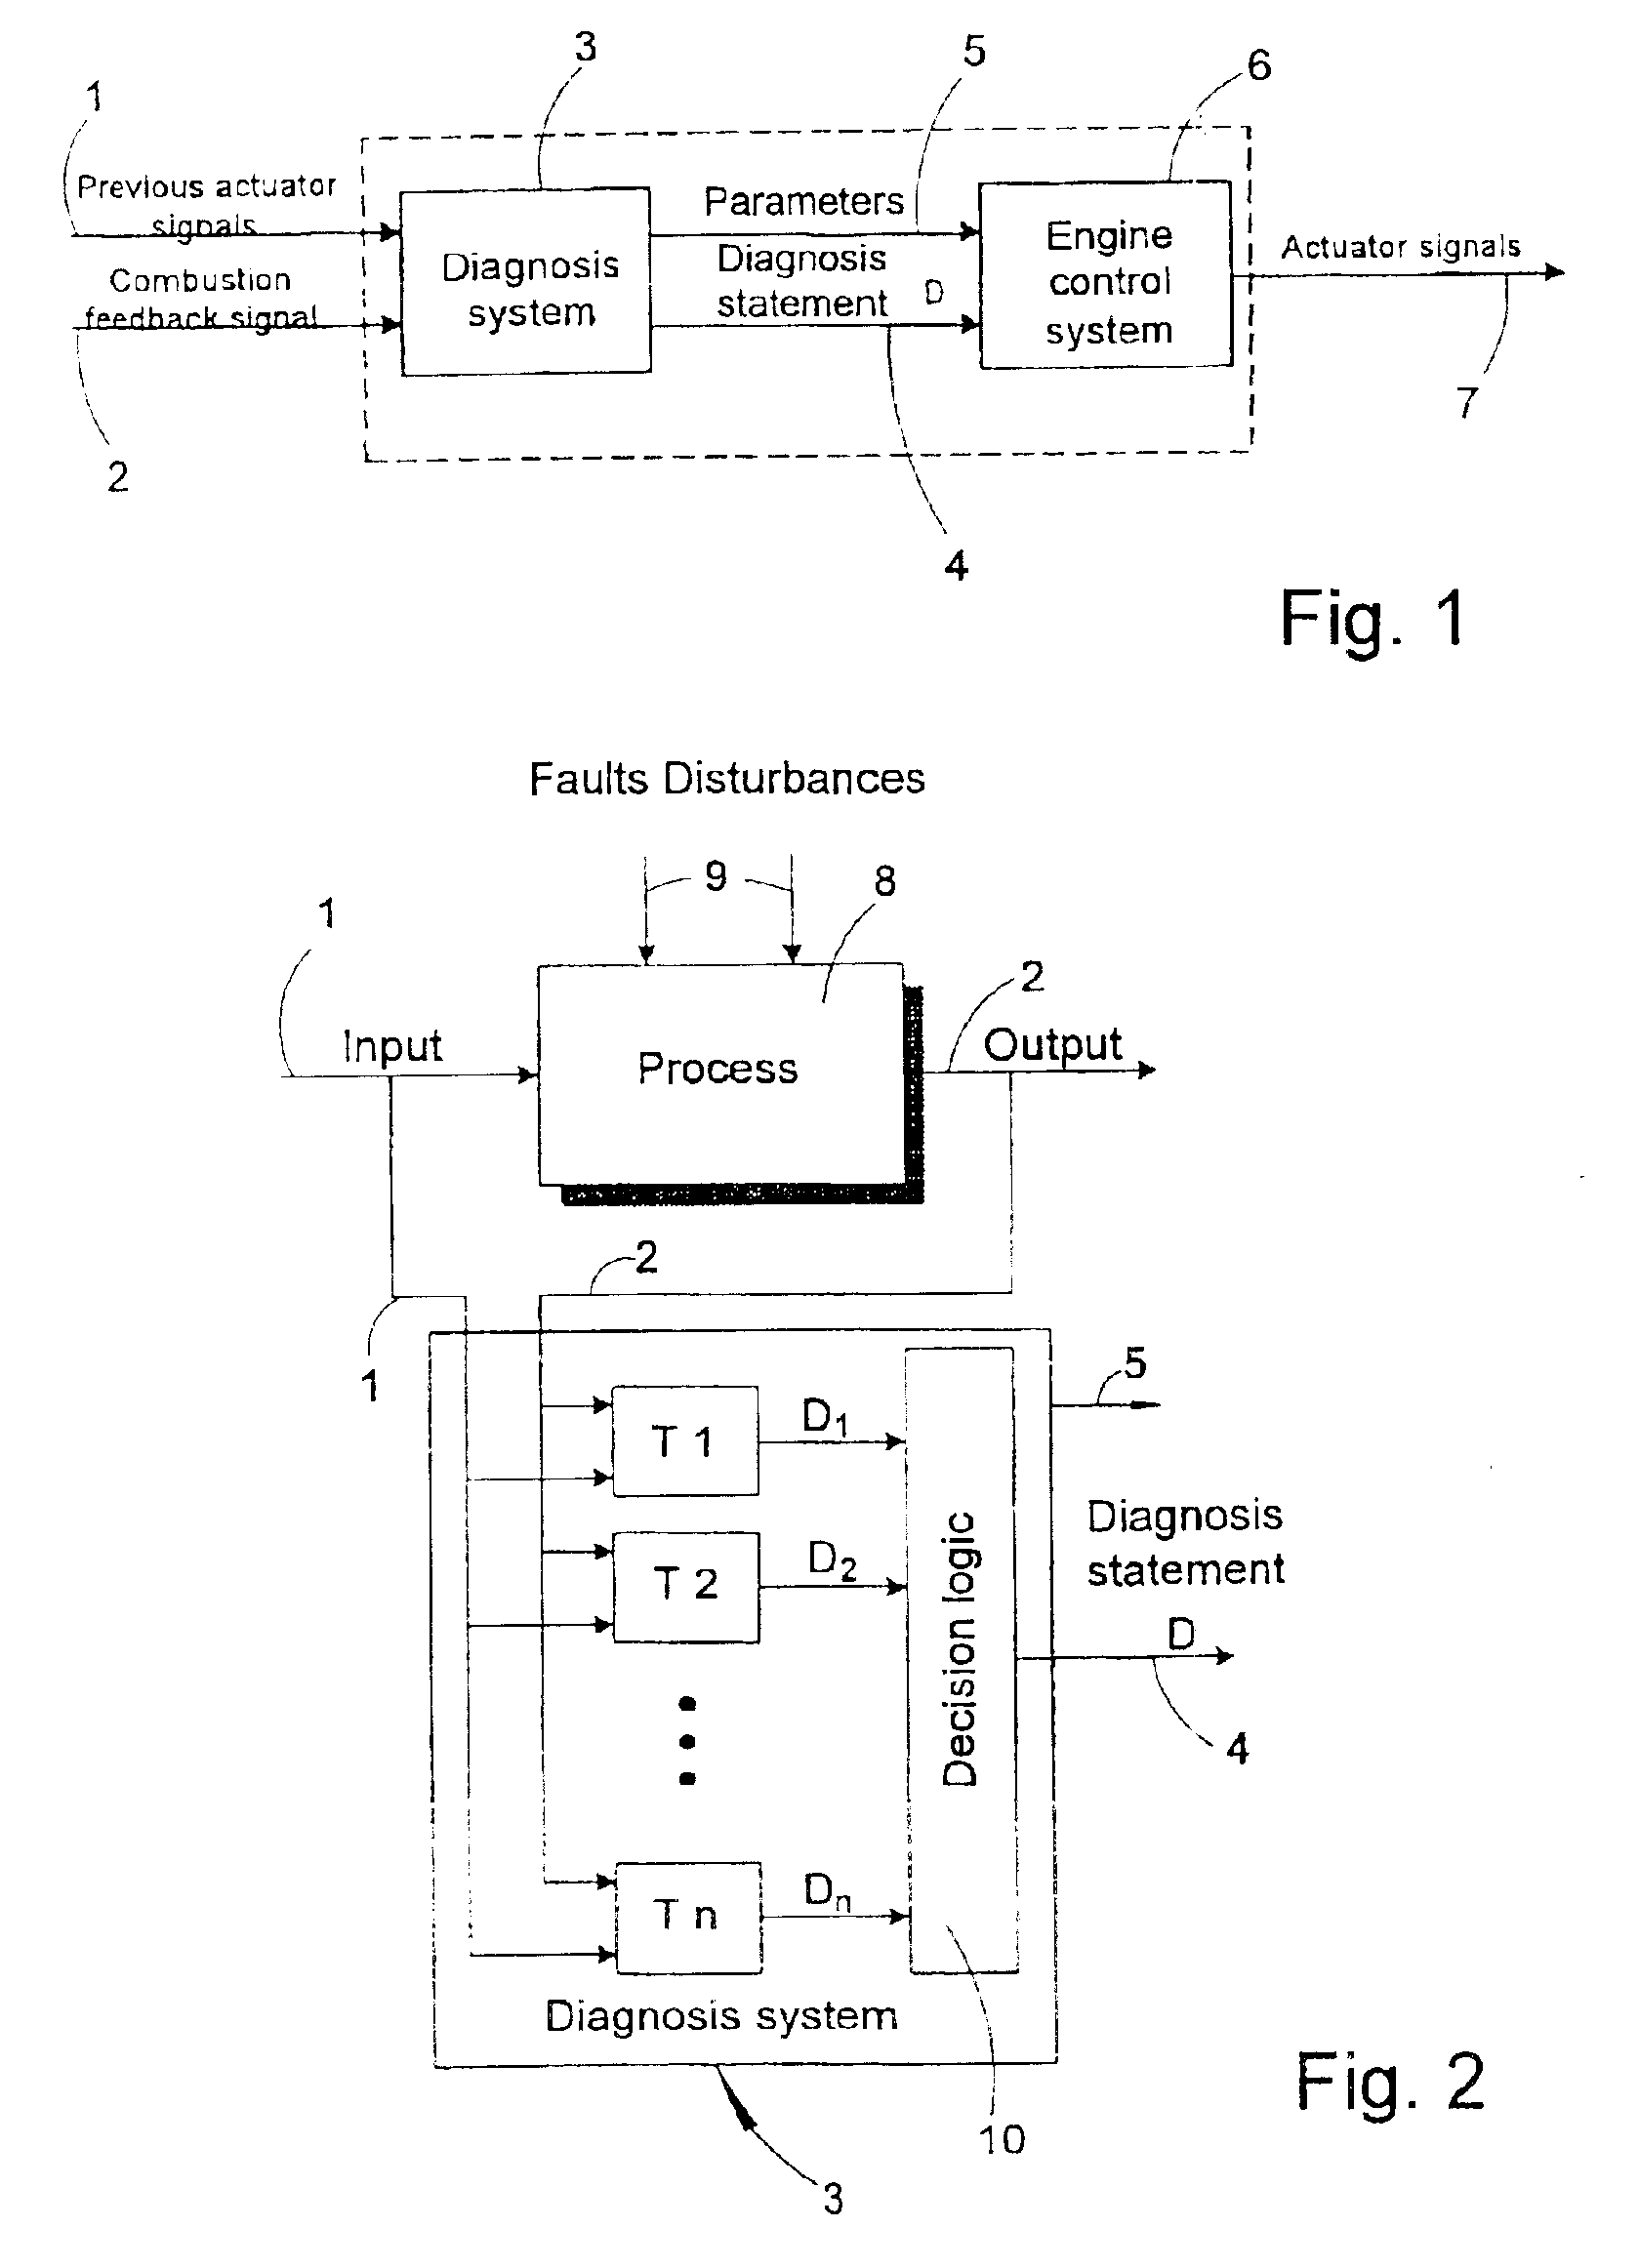 Method in connection with engine control